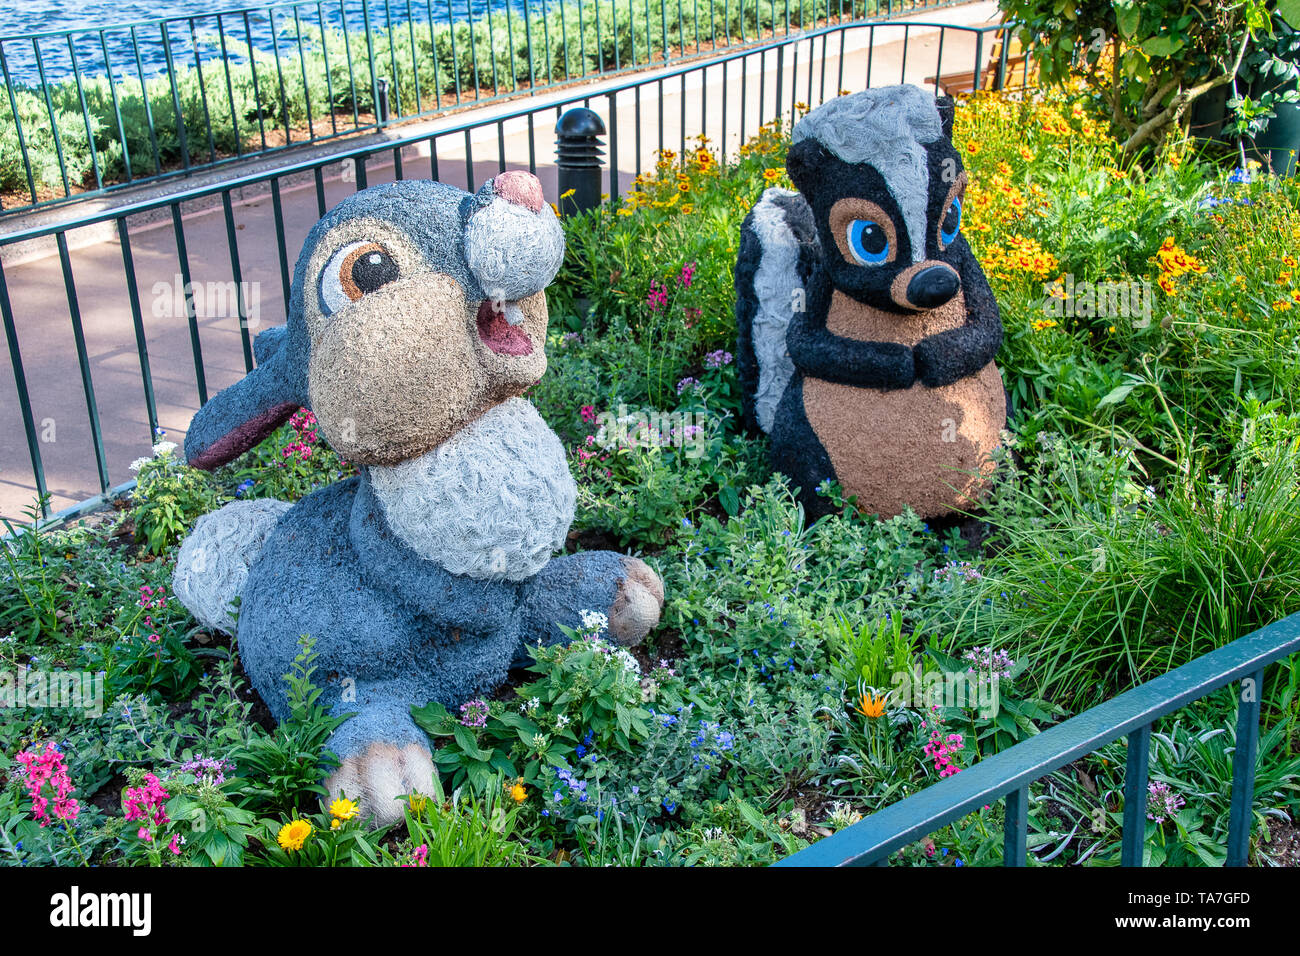 ORLANDO, USA. 29TH APRIL 2019: Thumper and flower topiary display figure on display at Disney World Stock Photo